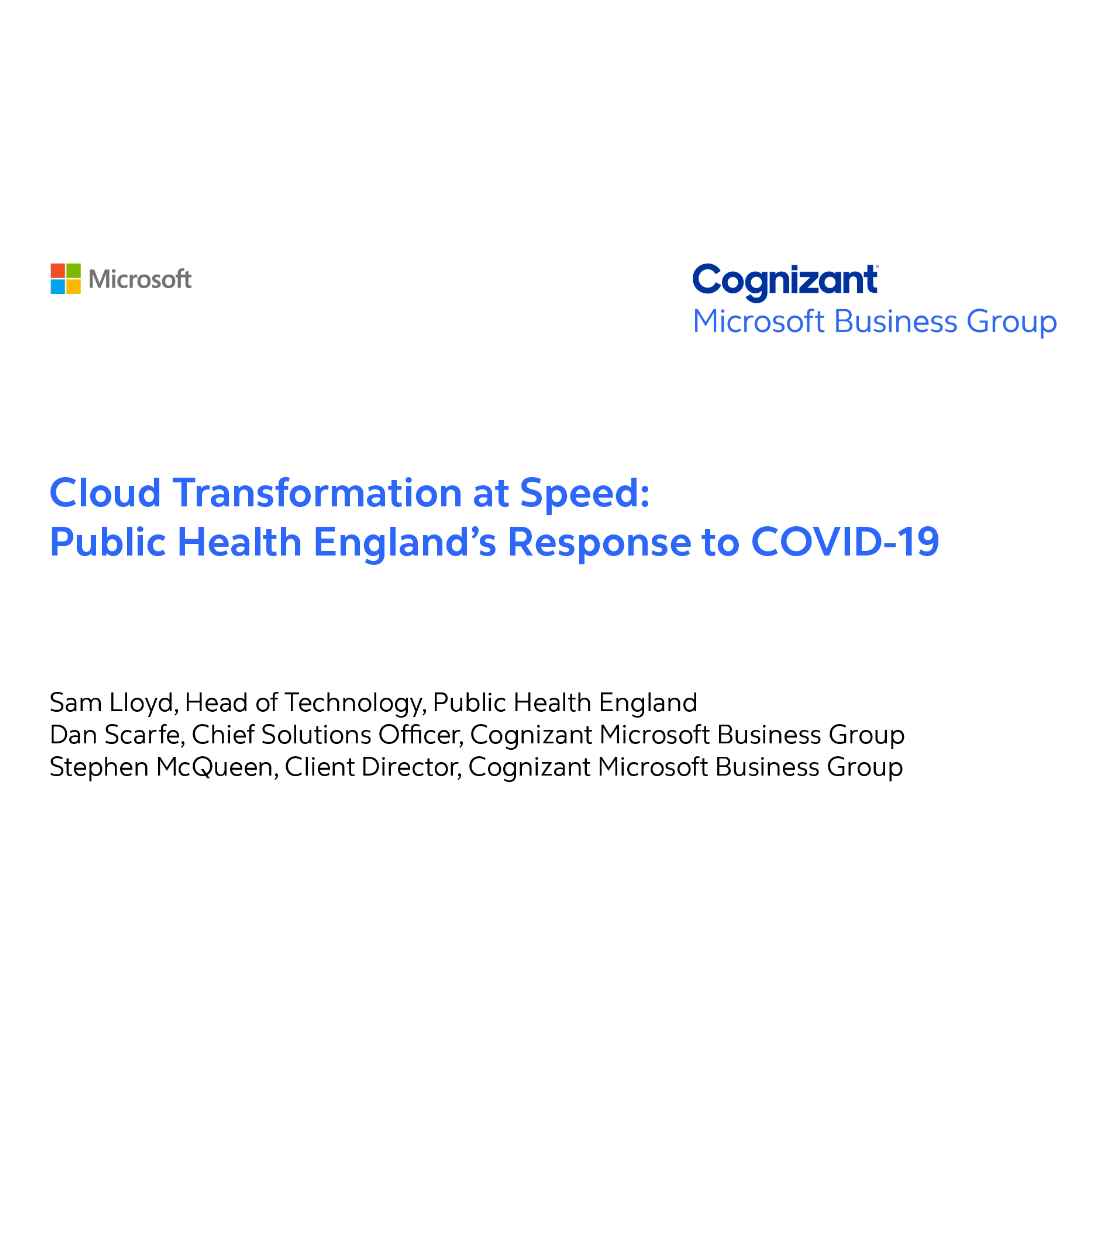 Cloud Transformation at Speed: PHE (UKHSA)’s Response to Covid-19